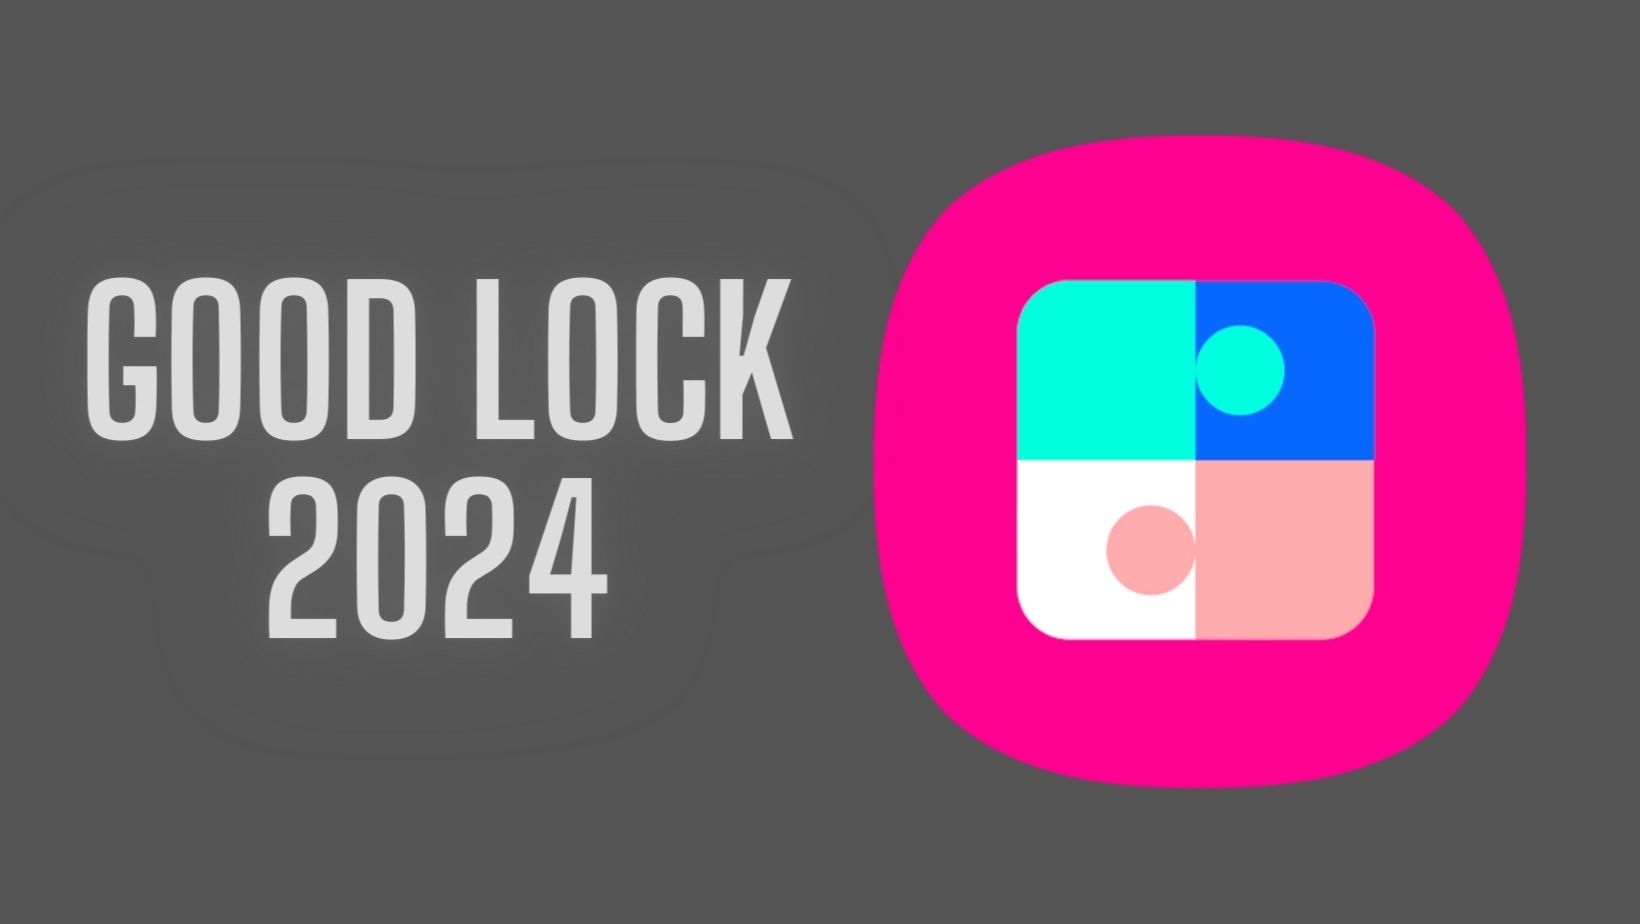 Good Lock 2024 is available for all Samsung devices [Patched APK Available]